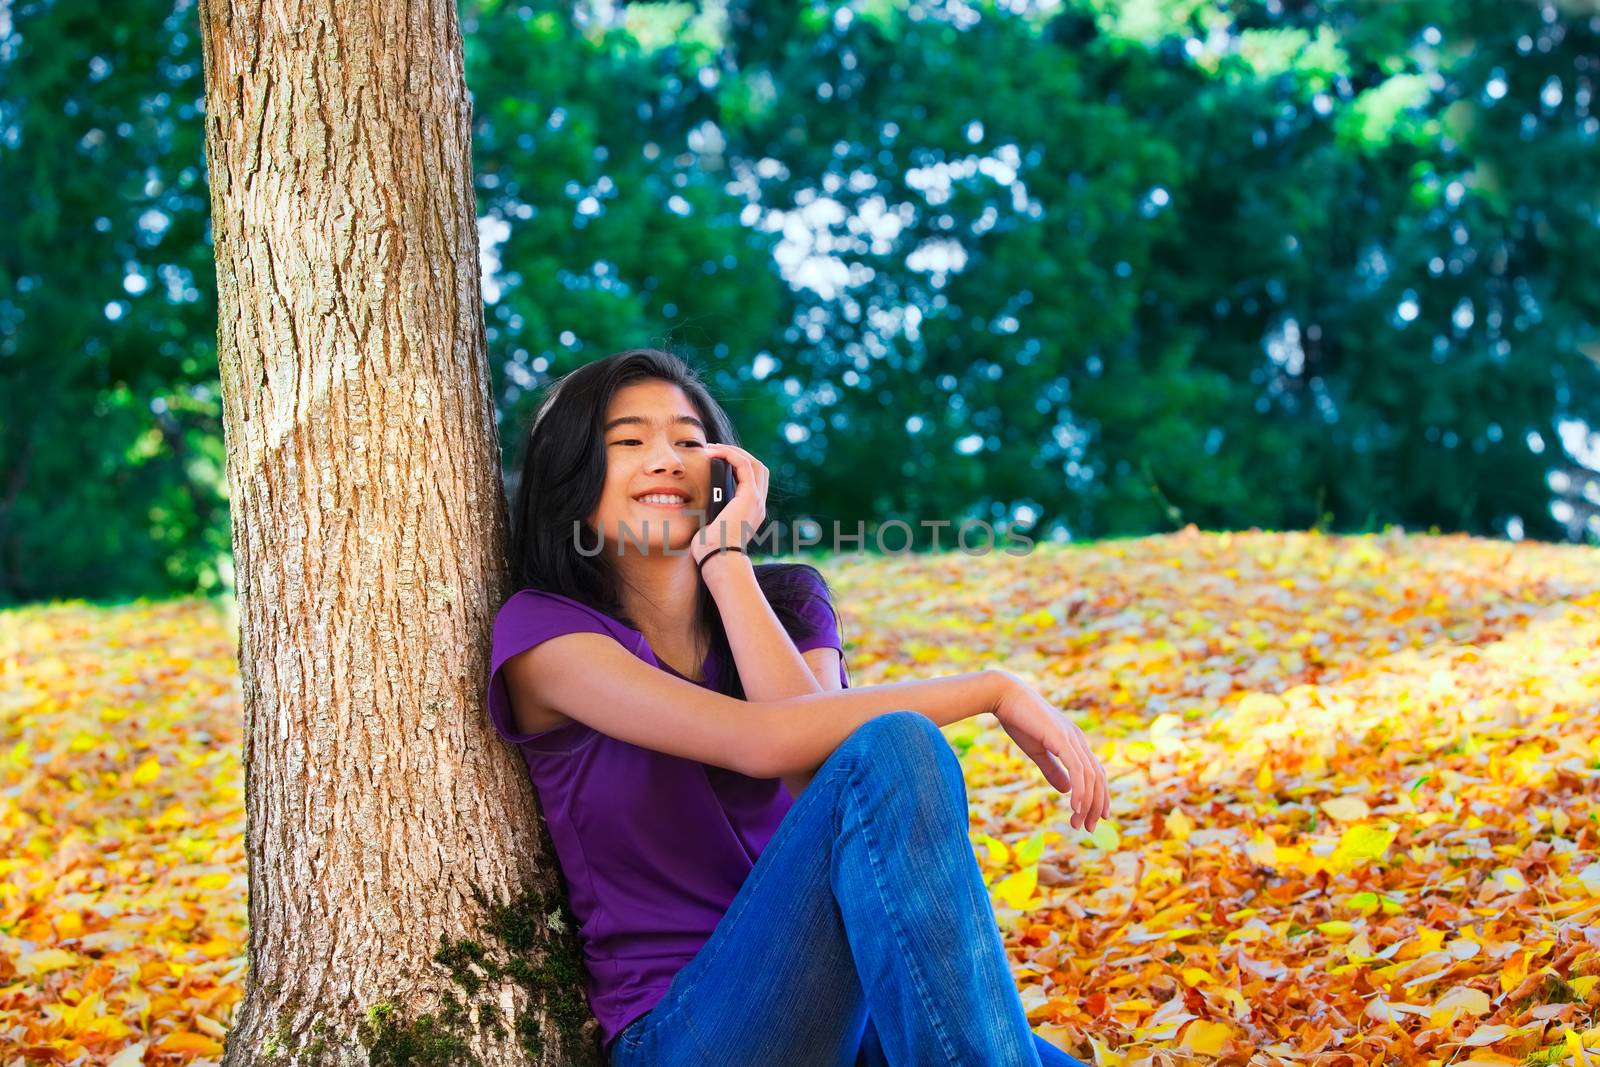 Teen girl sitting against autumn tree using cell phone by jarenwicklund